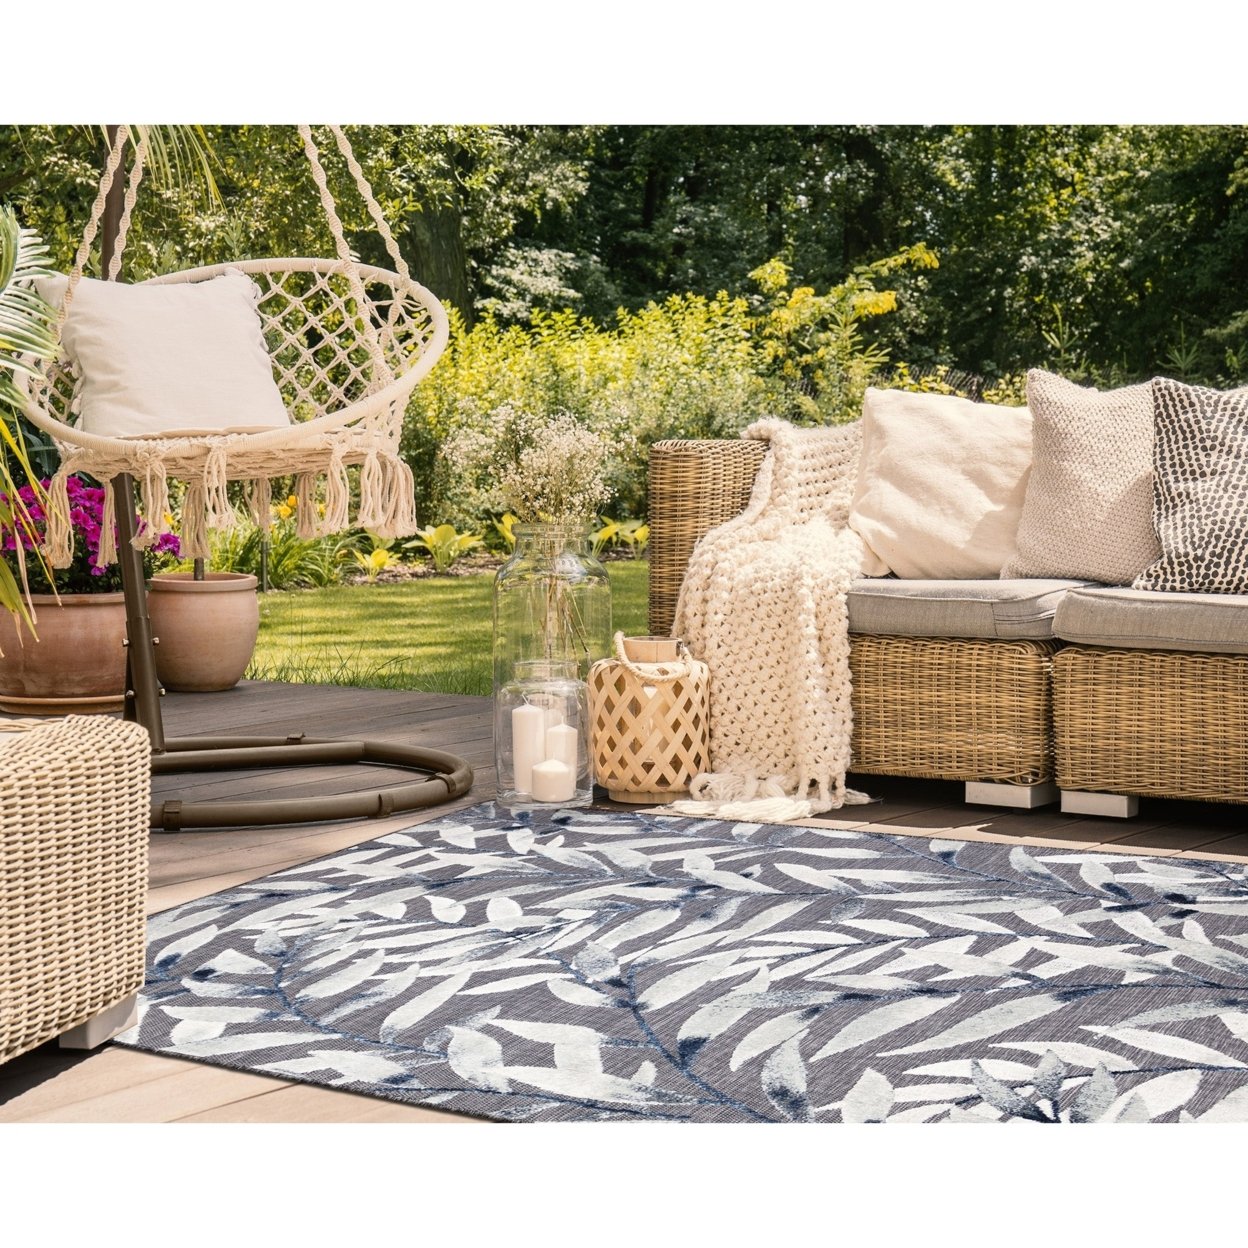 Liora Manne Canyon Vines Indoor Outdoor Area Rug Charcoal - 4'9 X 7'6